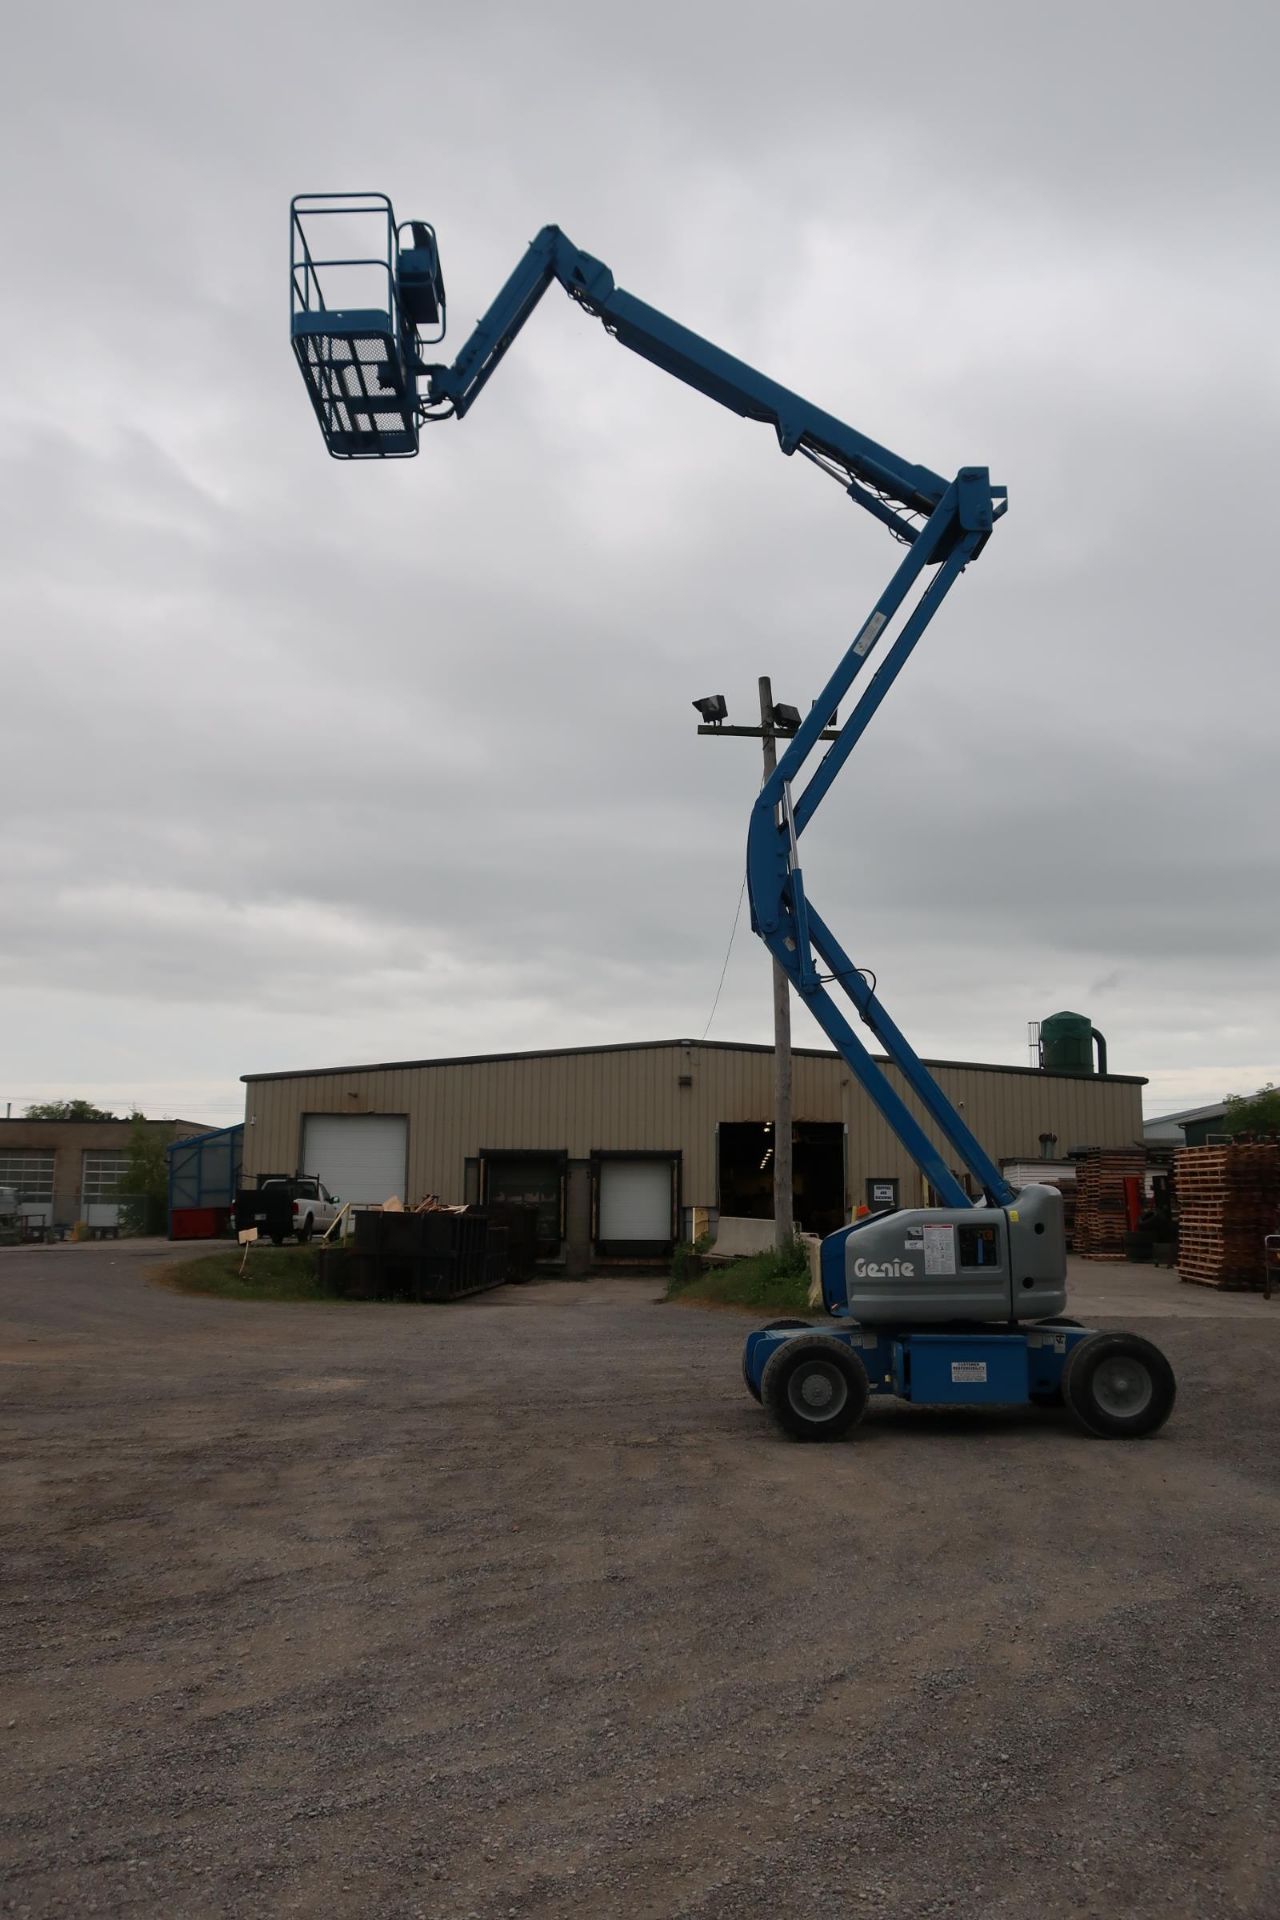 FREE CUSTOMS - MINT Genie Zoom Boom Articulating Lift model Z-45/25 45' height Electric LOW HOURS - Image 3 of 4